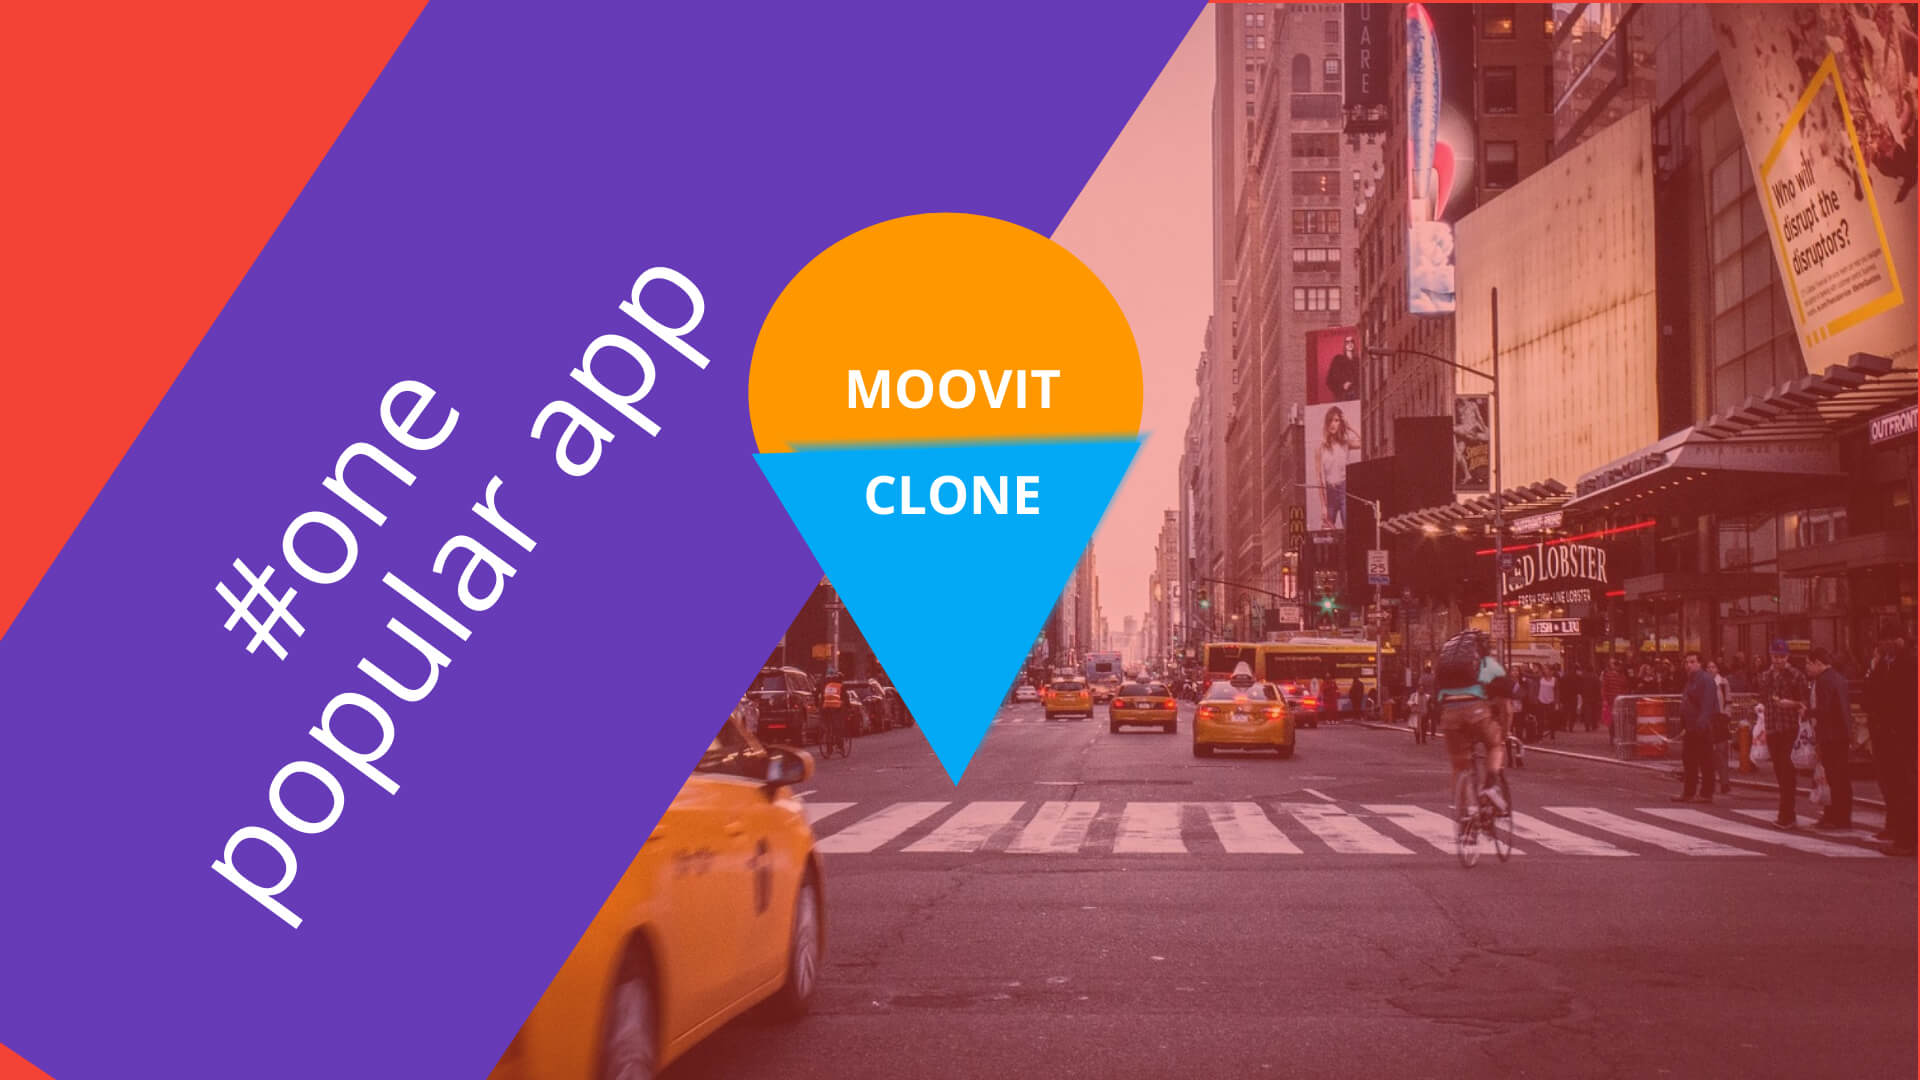 Are You Interested in Cloning an Application Like Moovit?  Then Check Out This Guide